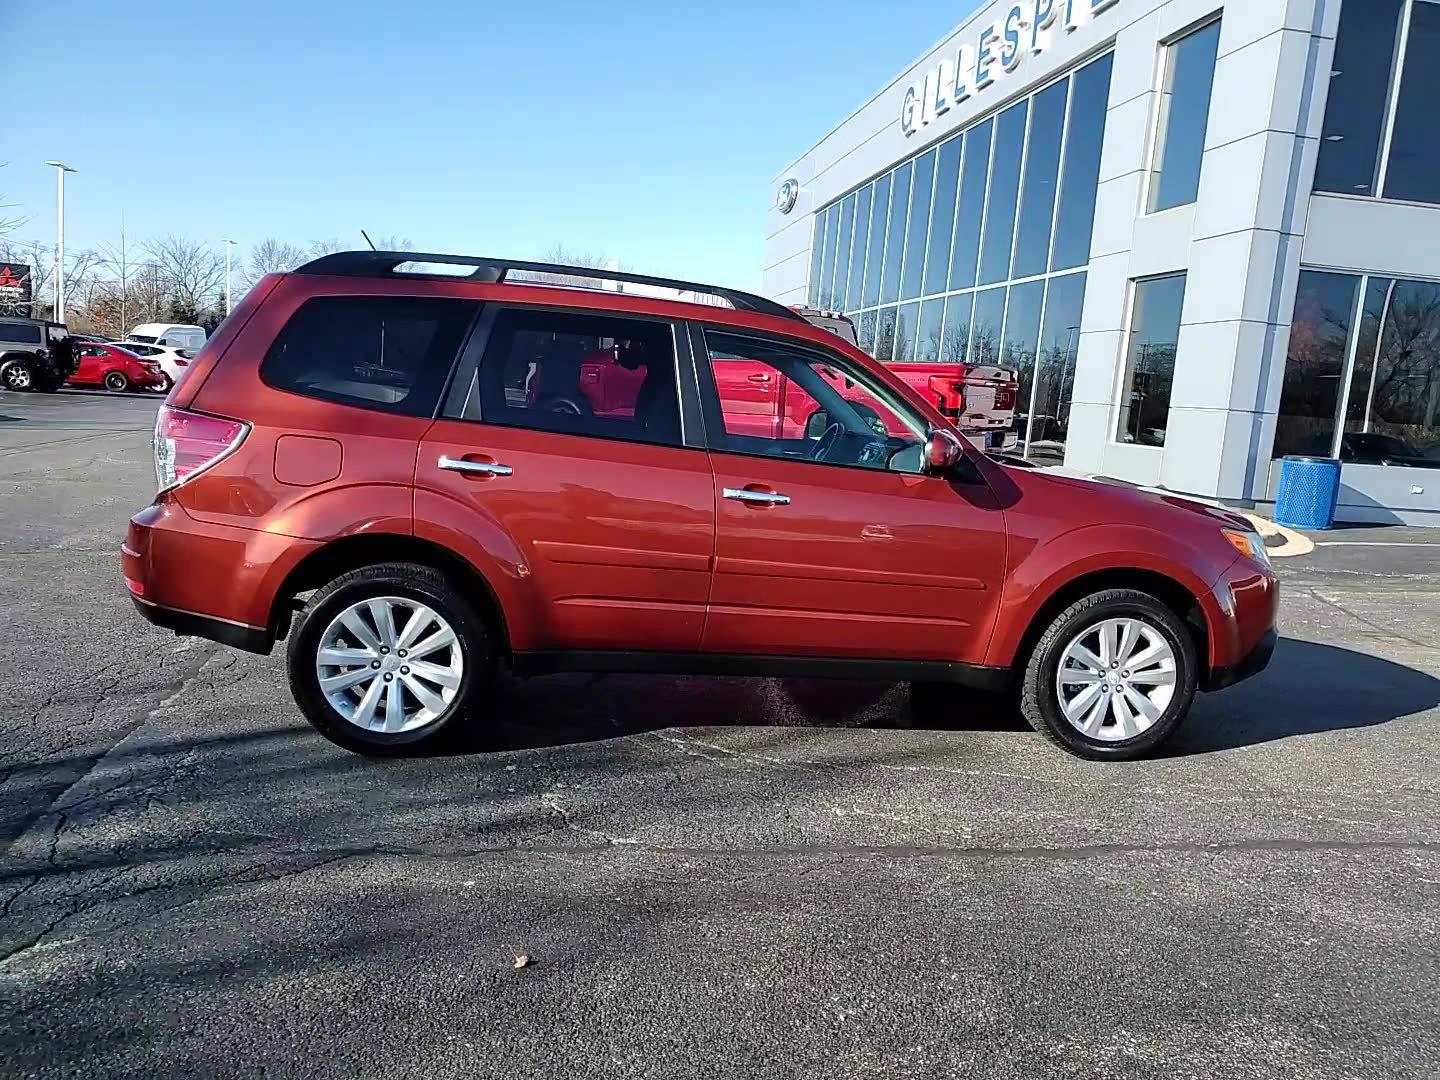 Used 2011 Subaru Forester X Premium Package with VIN JF2SHBCCXBH702920 for sale in Gurnee, IL